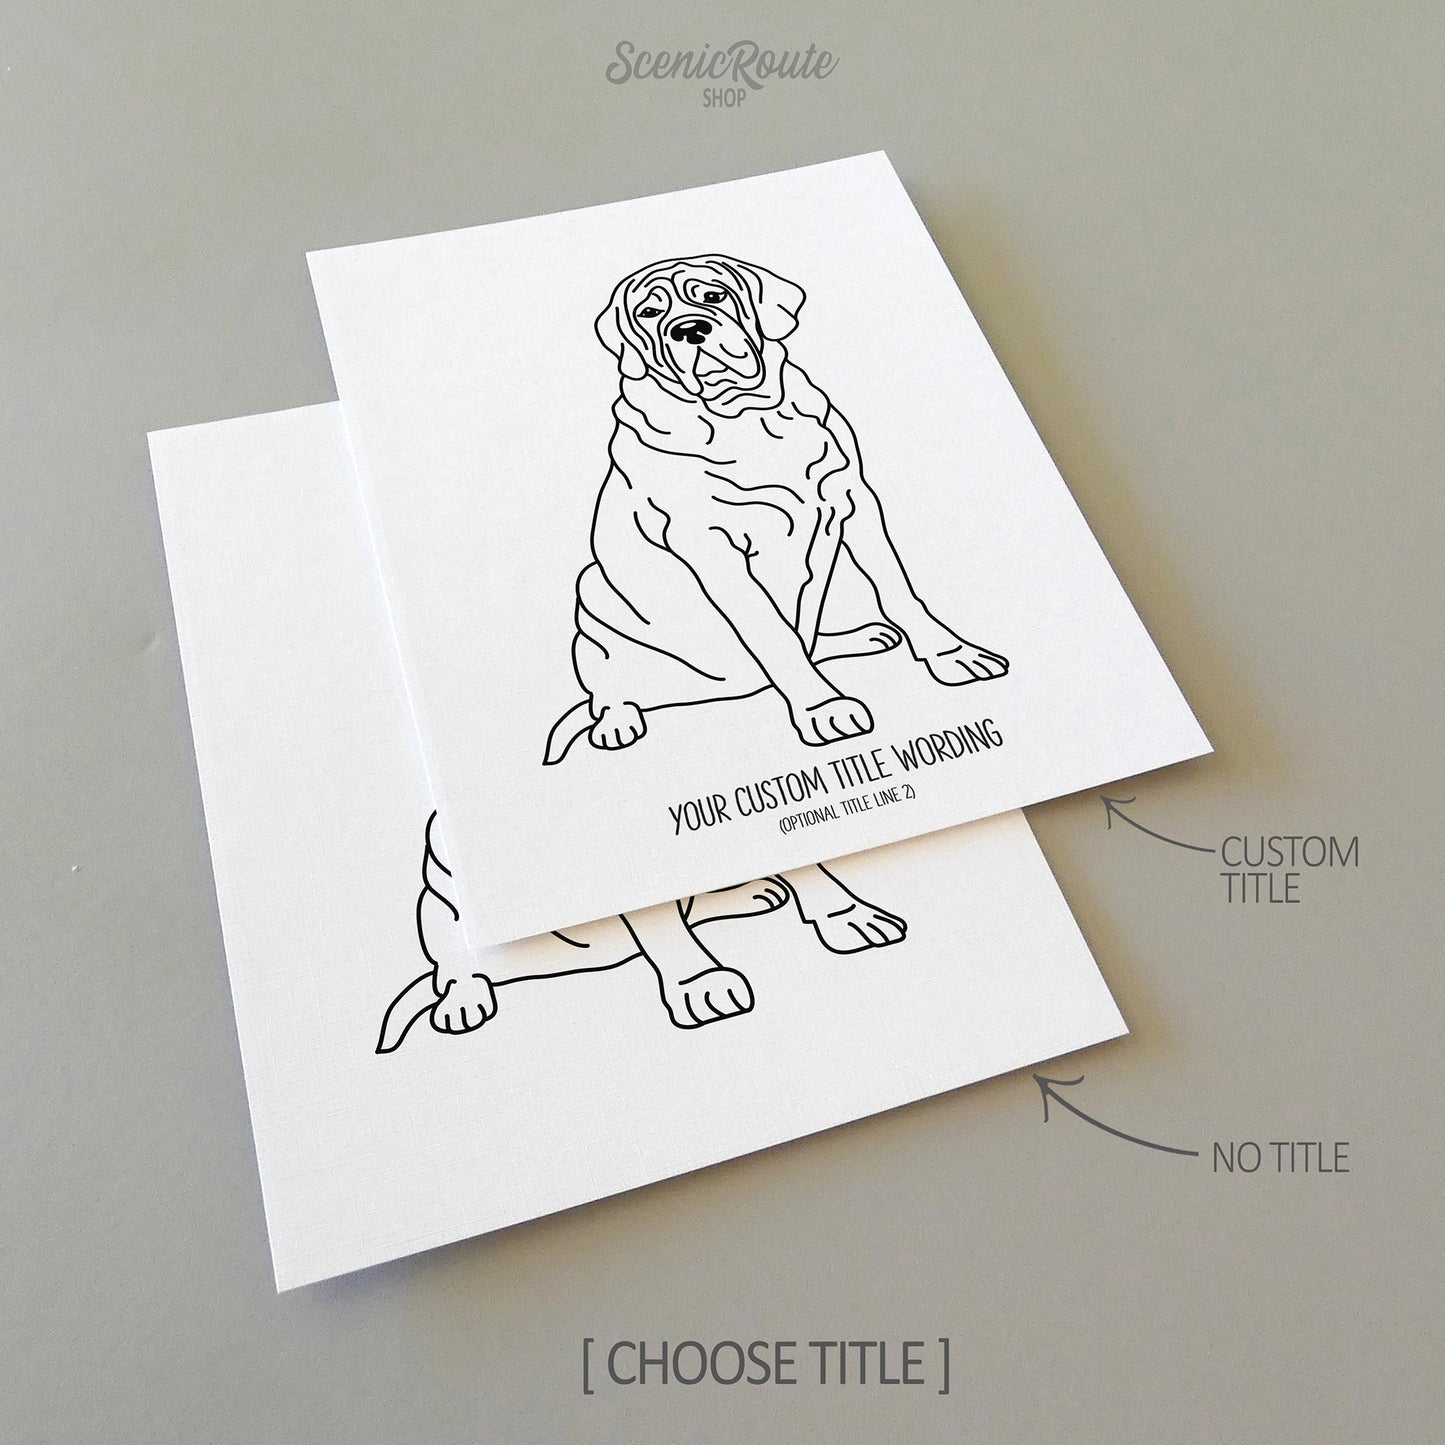 Two line art drawings of a Mastiff dog on white linen paper with a gray background.  The pieces are shown with “No Title” and “Custom Title” options for the available art print options.